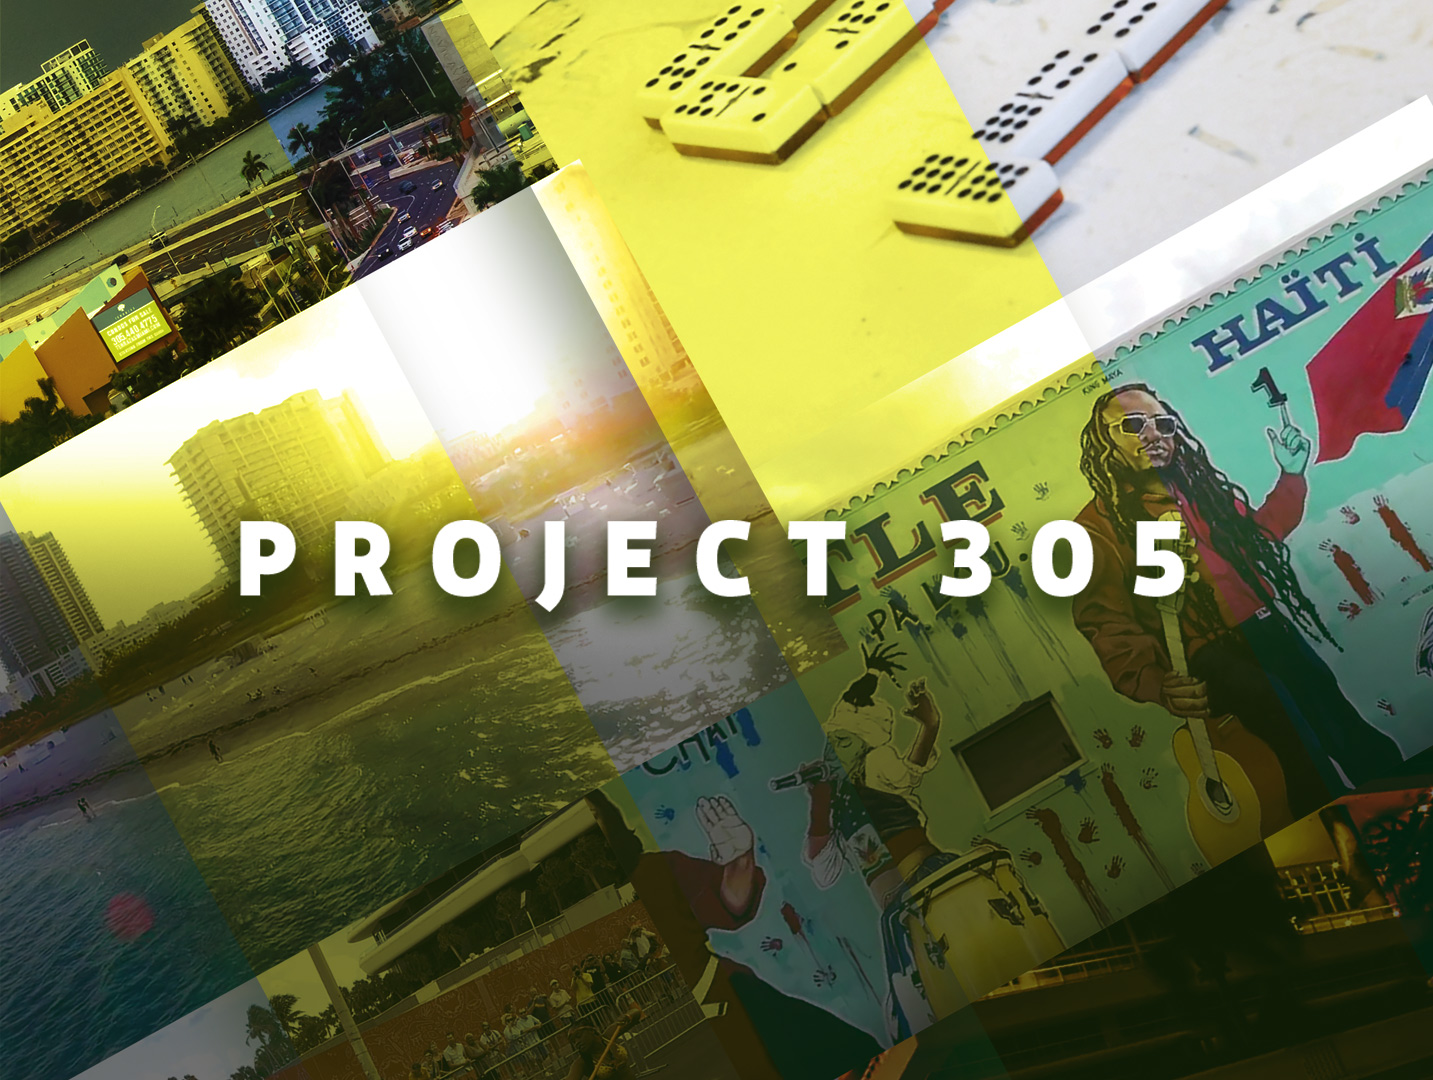 Project305 selected as Innovation Award Finalist